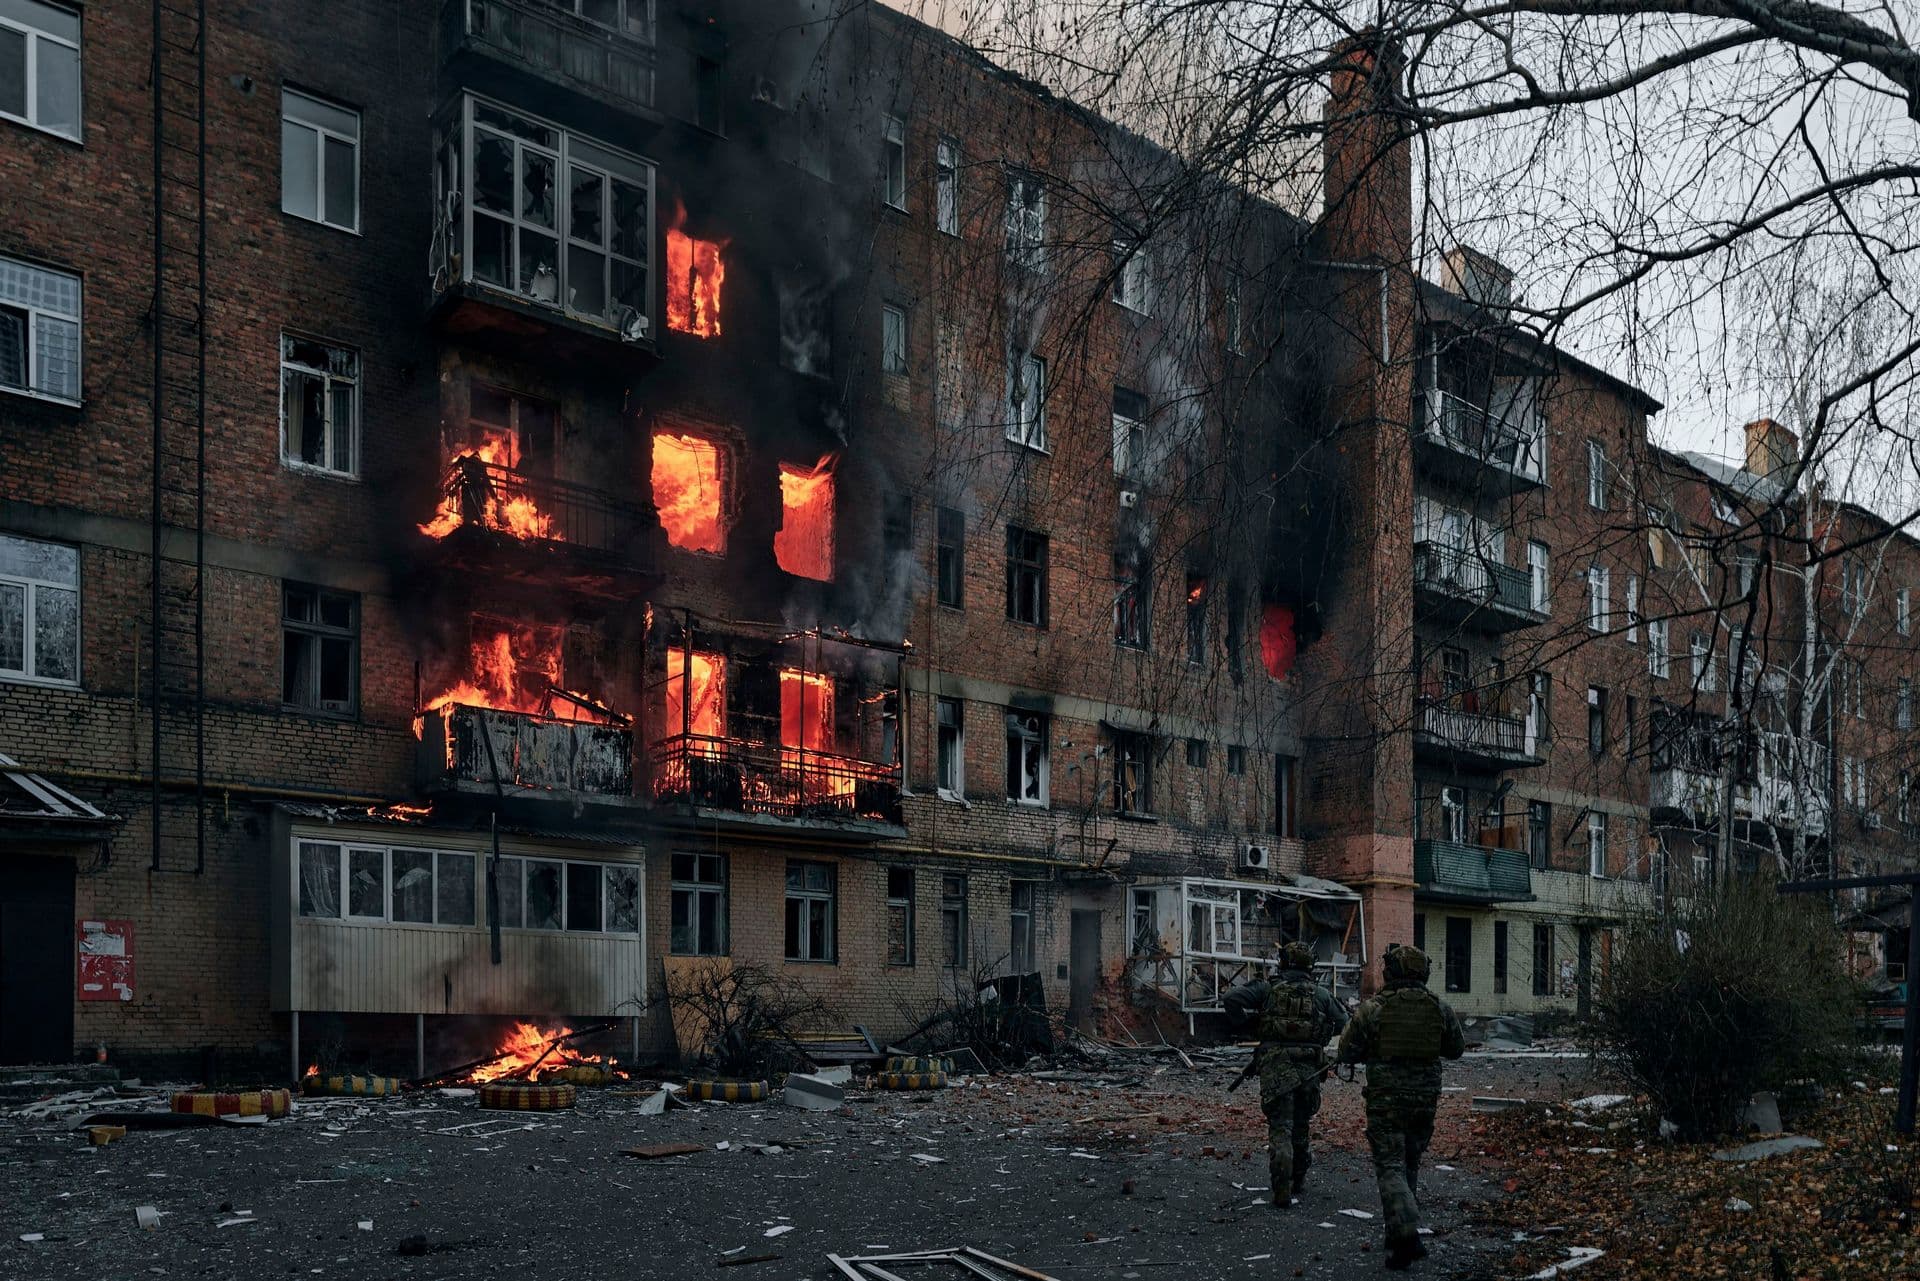 Ukrainian soldiers run to help people in an apartment building on fire after Russian shelling in Bakhmut